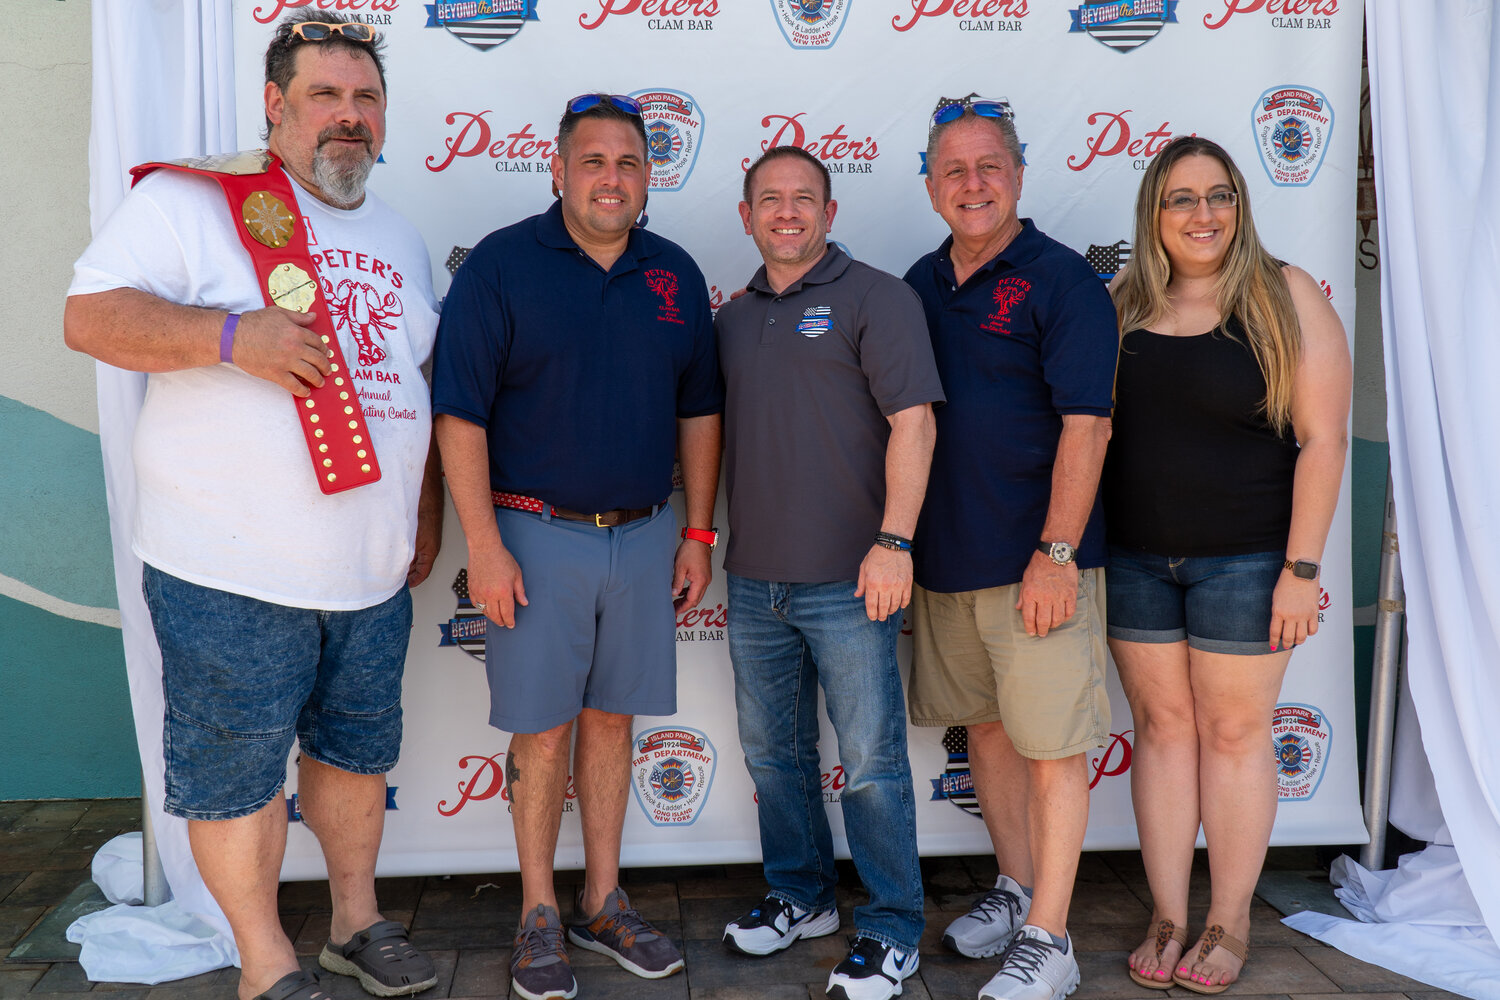 Joe Merchetti of Cheshire, Connecticut, won first place at the clam eating contest. With him, from left, were U.S. Rep. Anthony D’Esposito, Chris Panetta, Butch Yamali and Michelle Panetta.